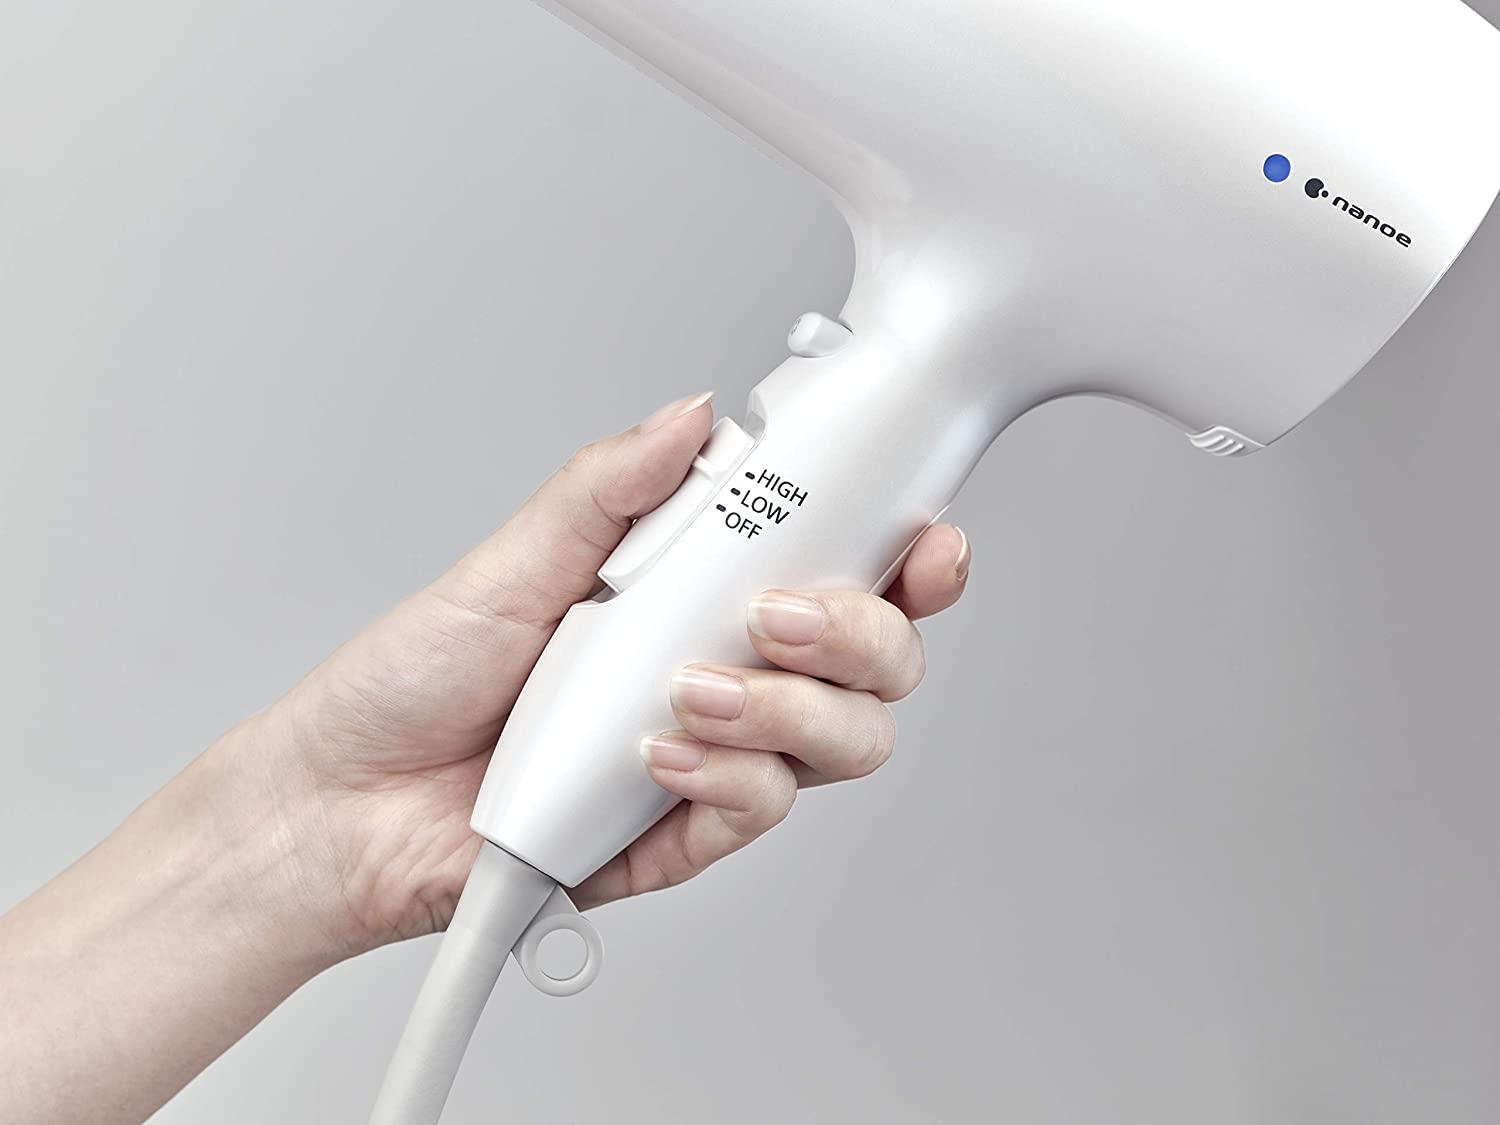 Panasonic Nanoe Salon Hair Dryer with Oscillating QuickDry Nozzle, Diffuser  and Concentrator Attachments, 3 Speed Heat Settings for Easy Styling and  Healthy Hair - EH-NA67-W (White)